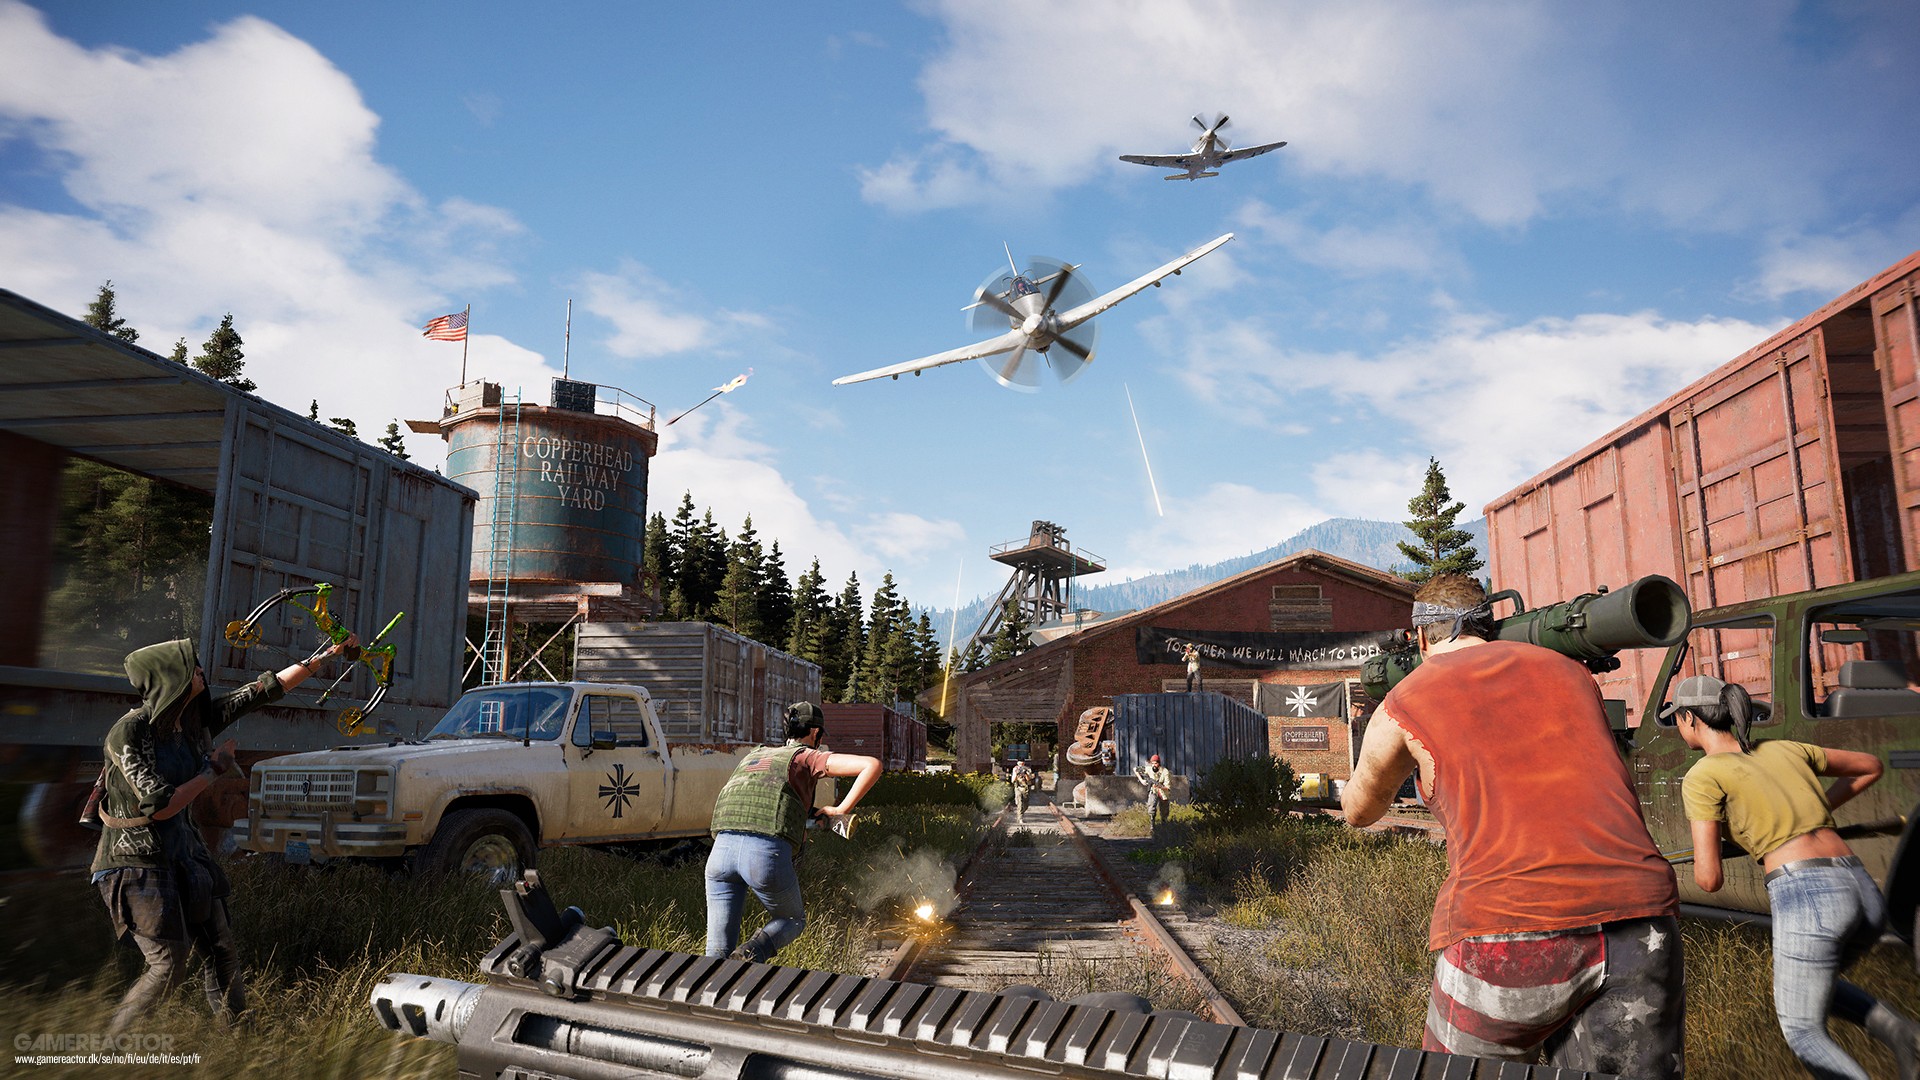 Far Cry 5's PC requirements have been revealed